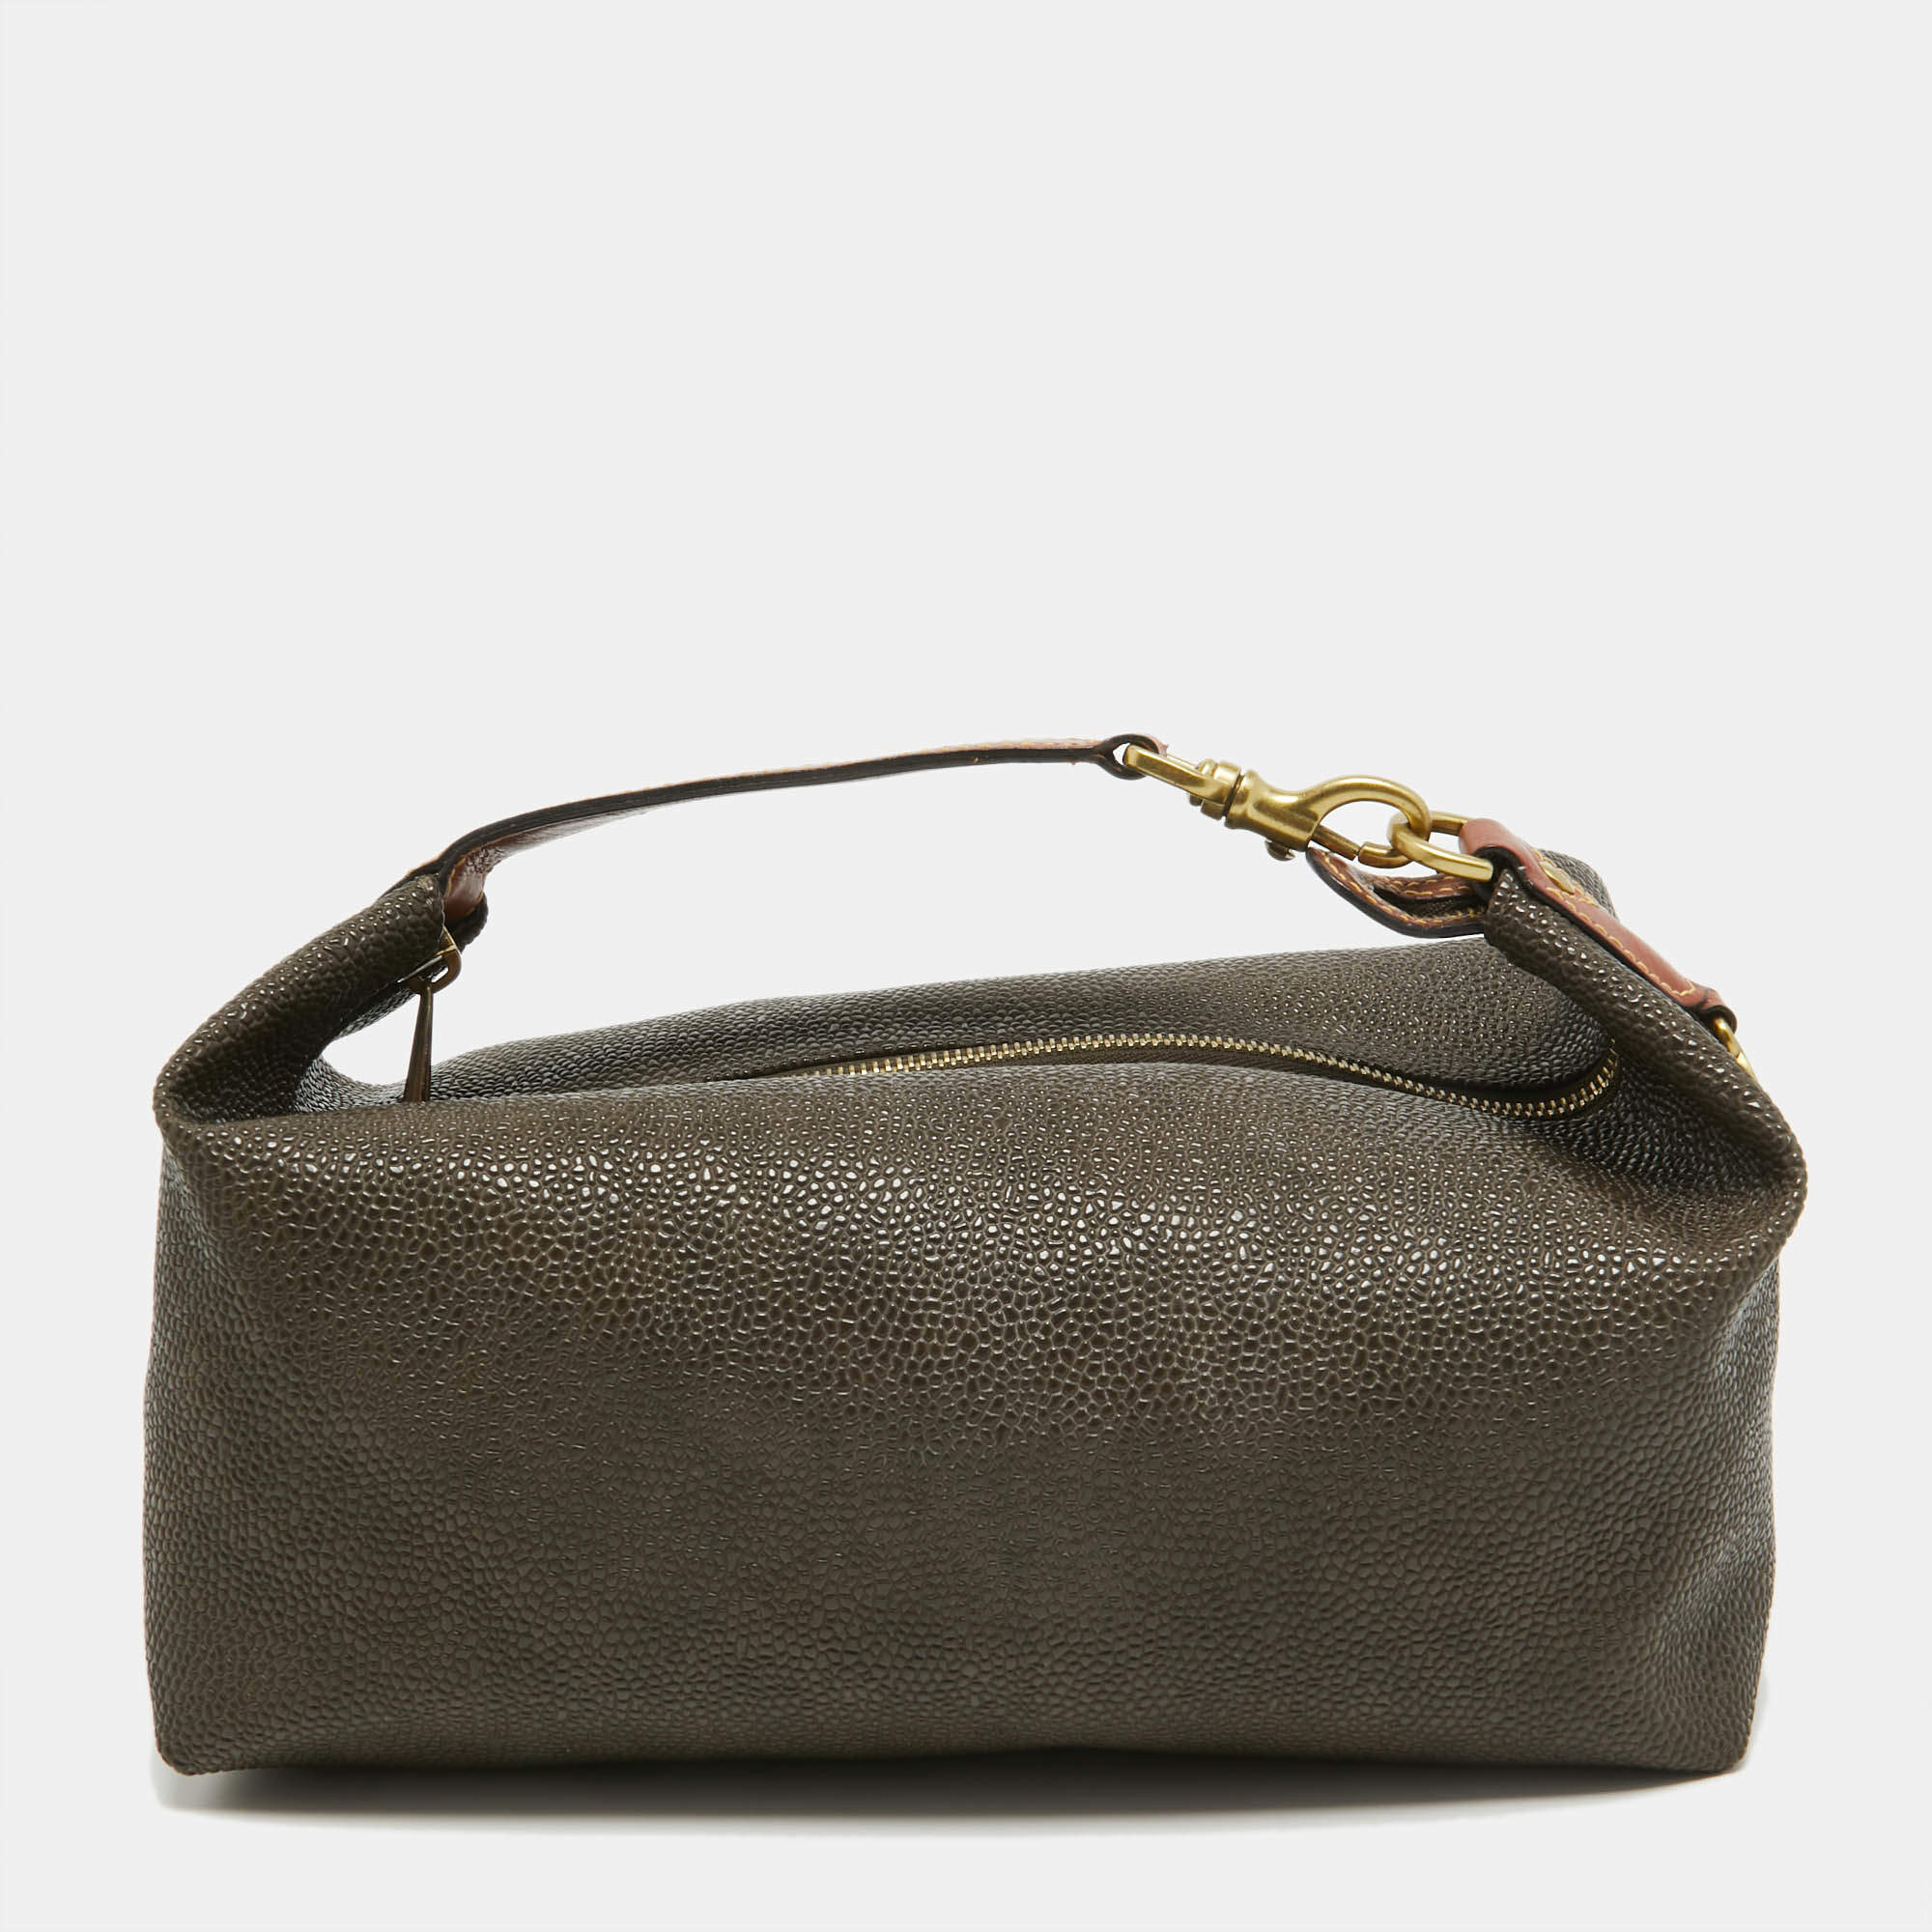 Mulberry Brown Textured Leather Zip Oversized Clutch